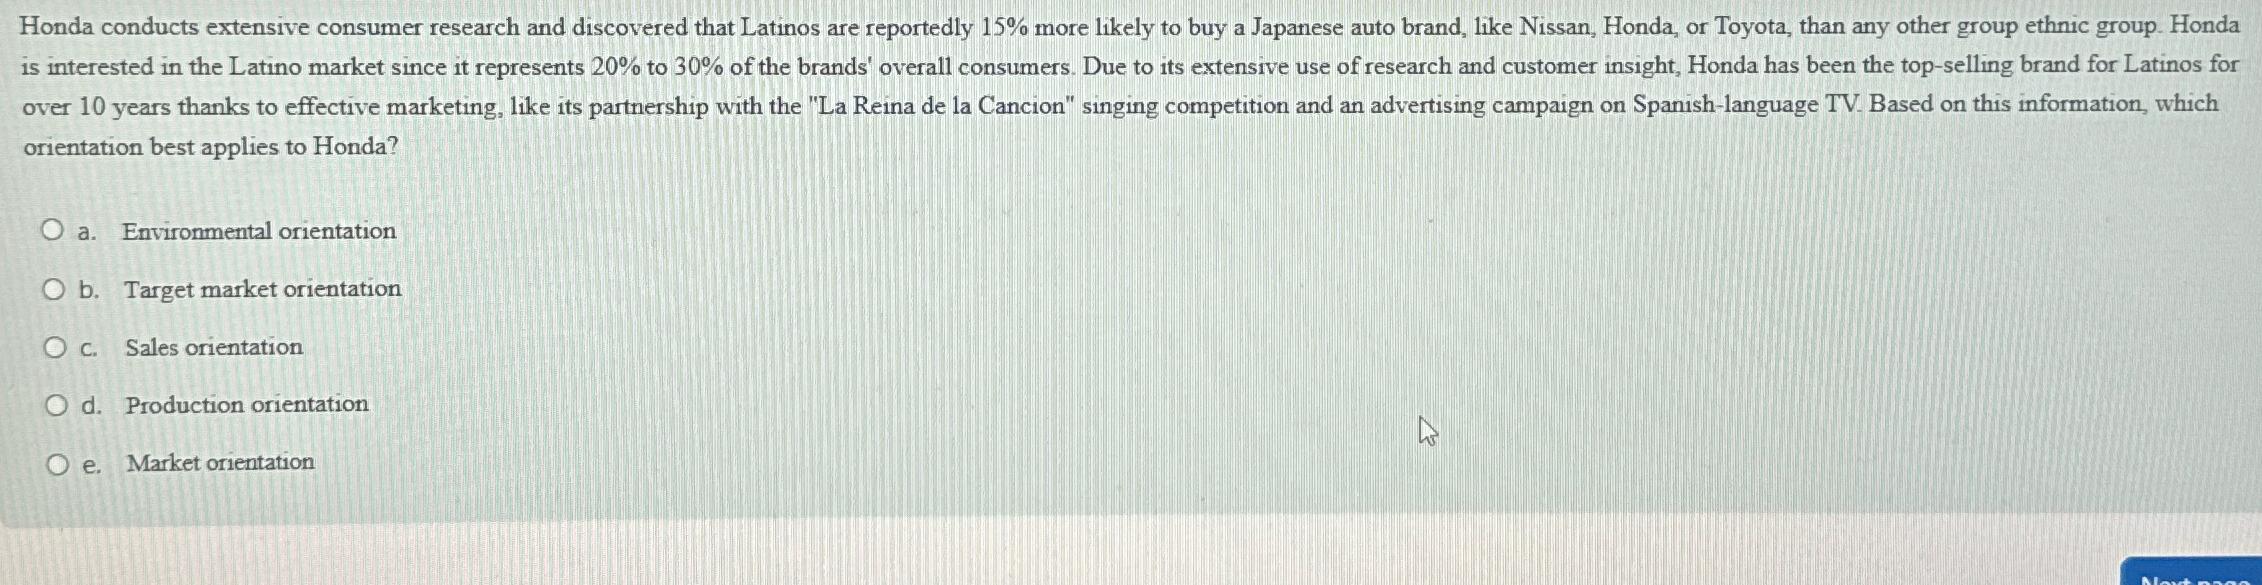 other group ethnic group. Honda Honda conducts extensive consumer research and discovered that Latinos are